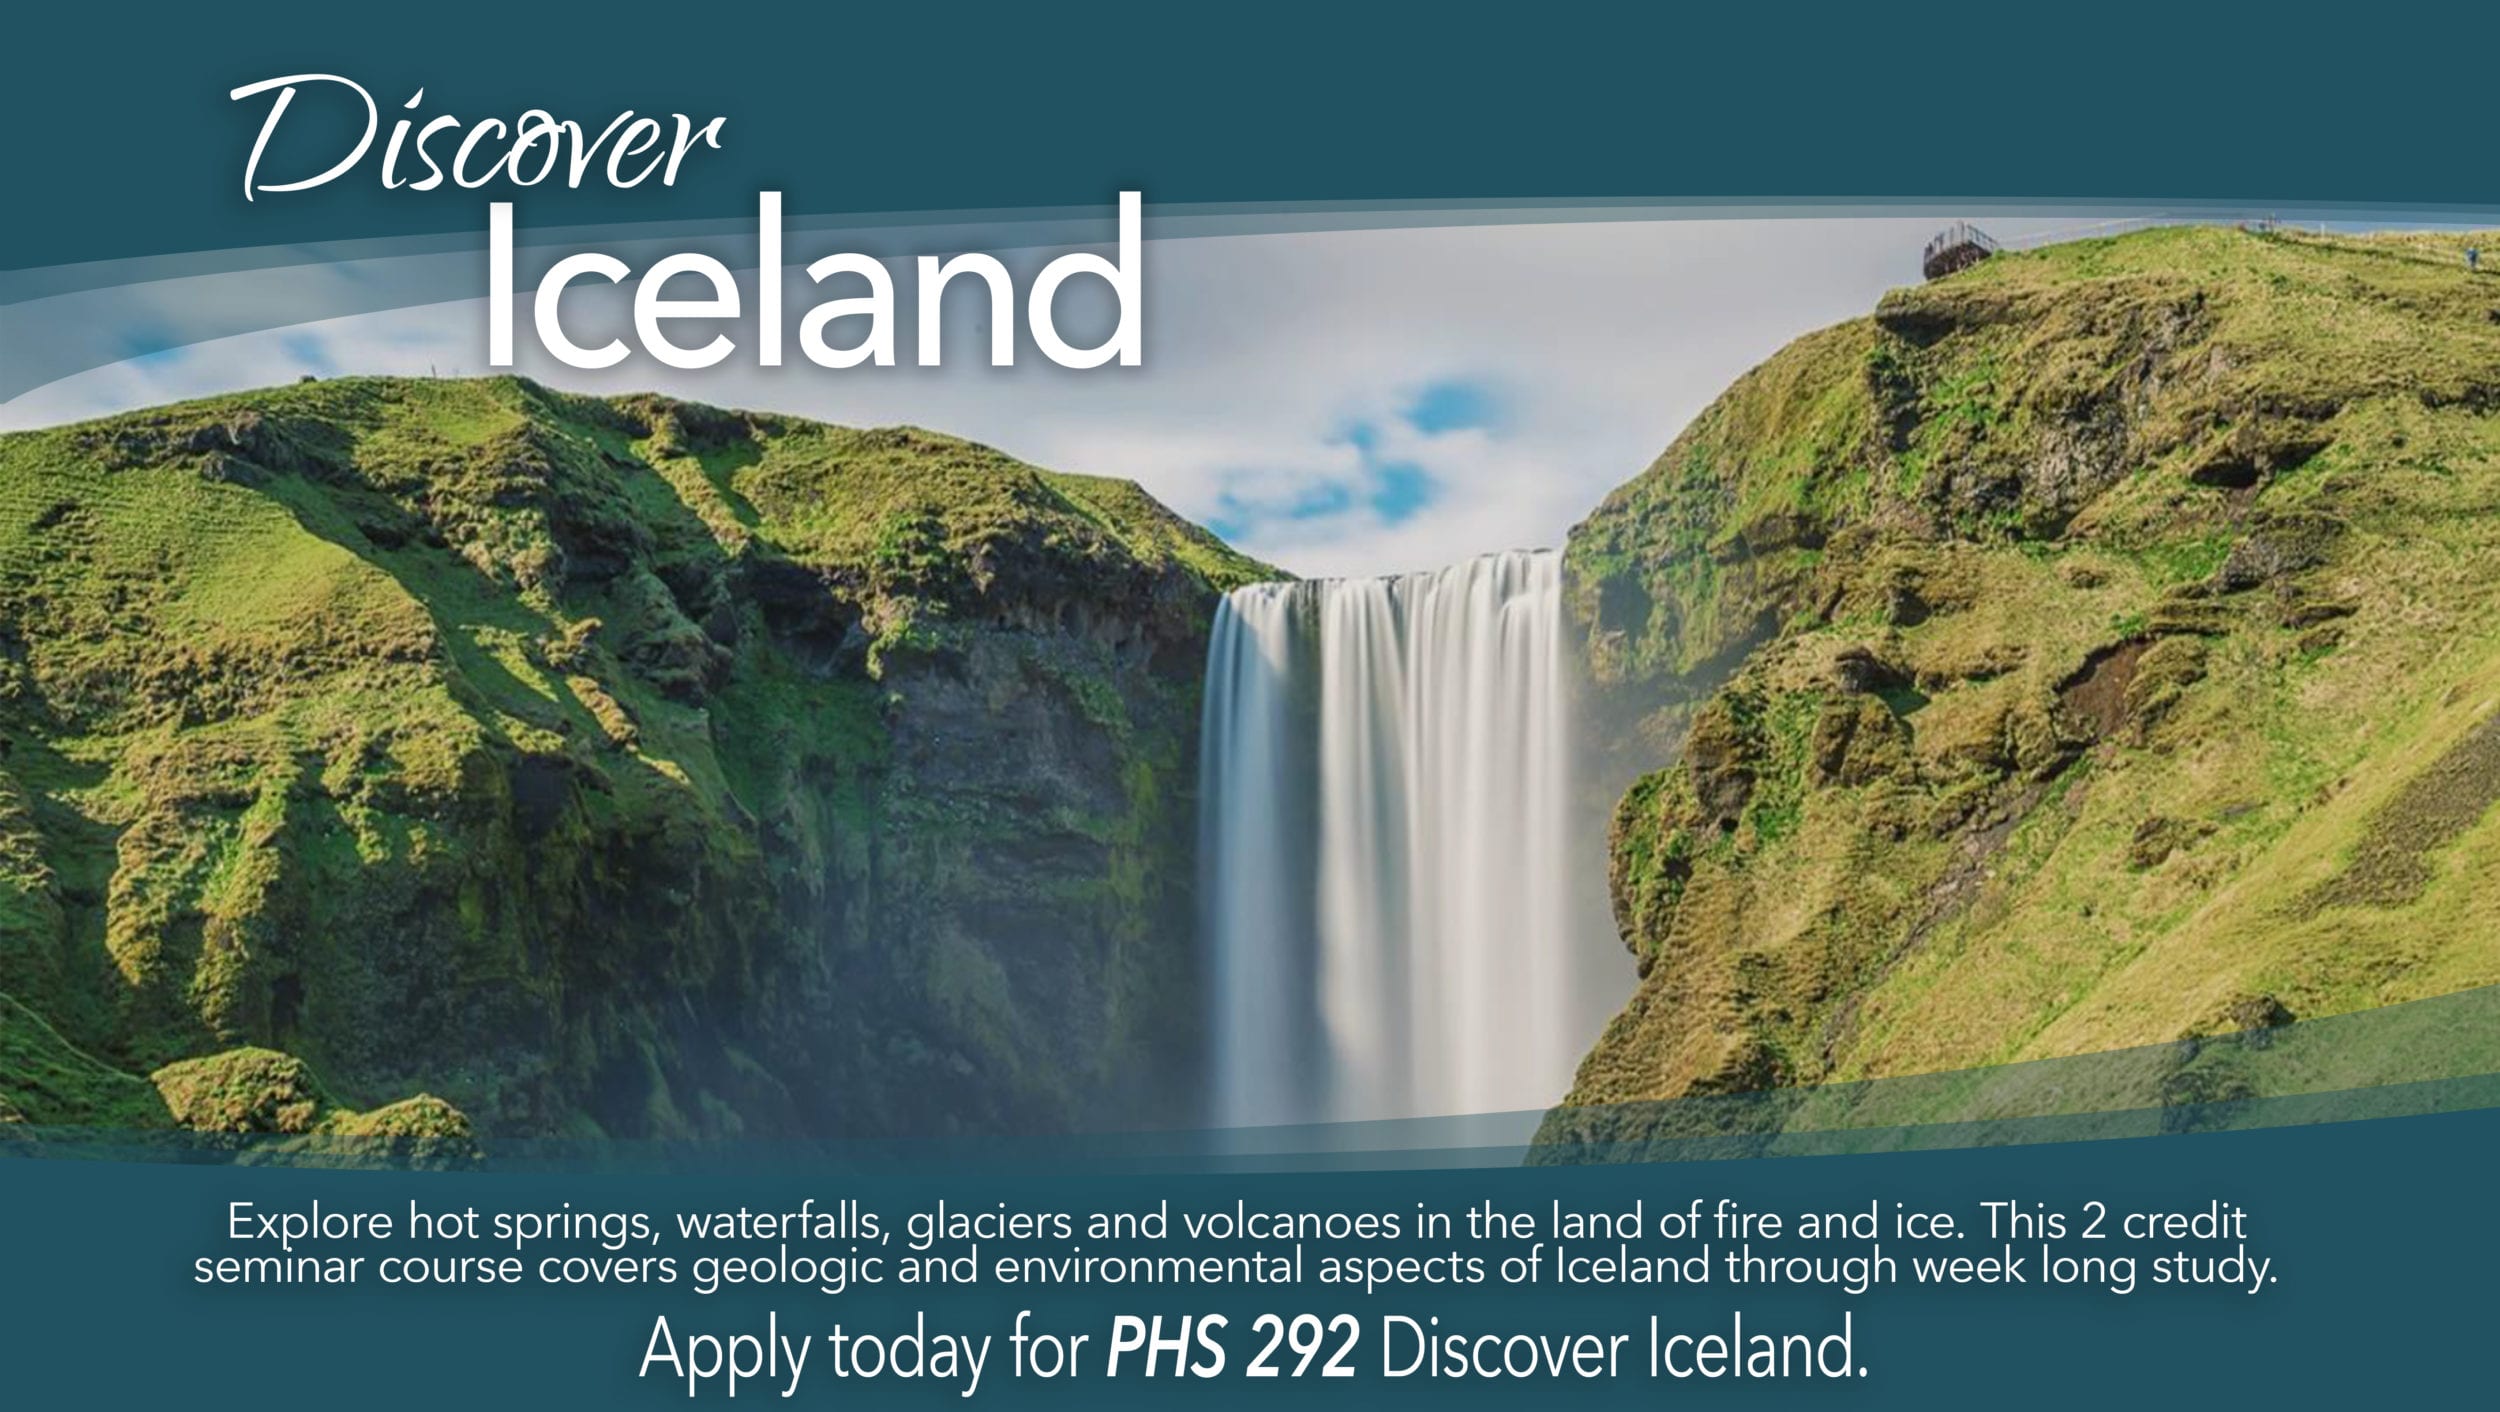 Deadline extended: Apply now for Discover Iceland!